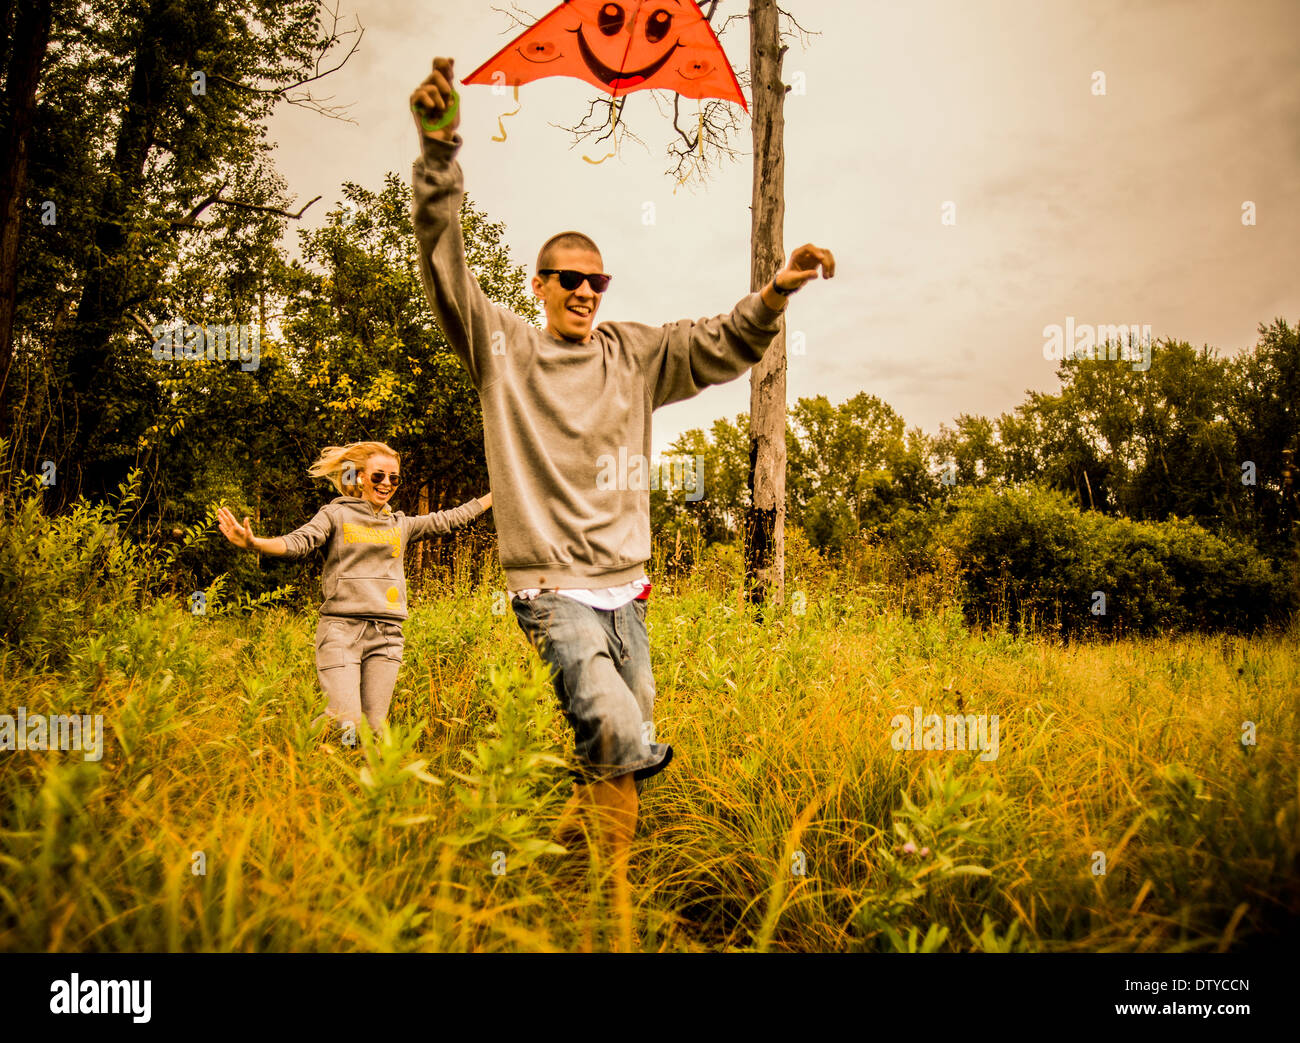 Caucasian couple flying kite in rural field Banque D'Images